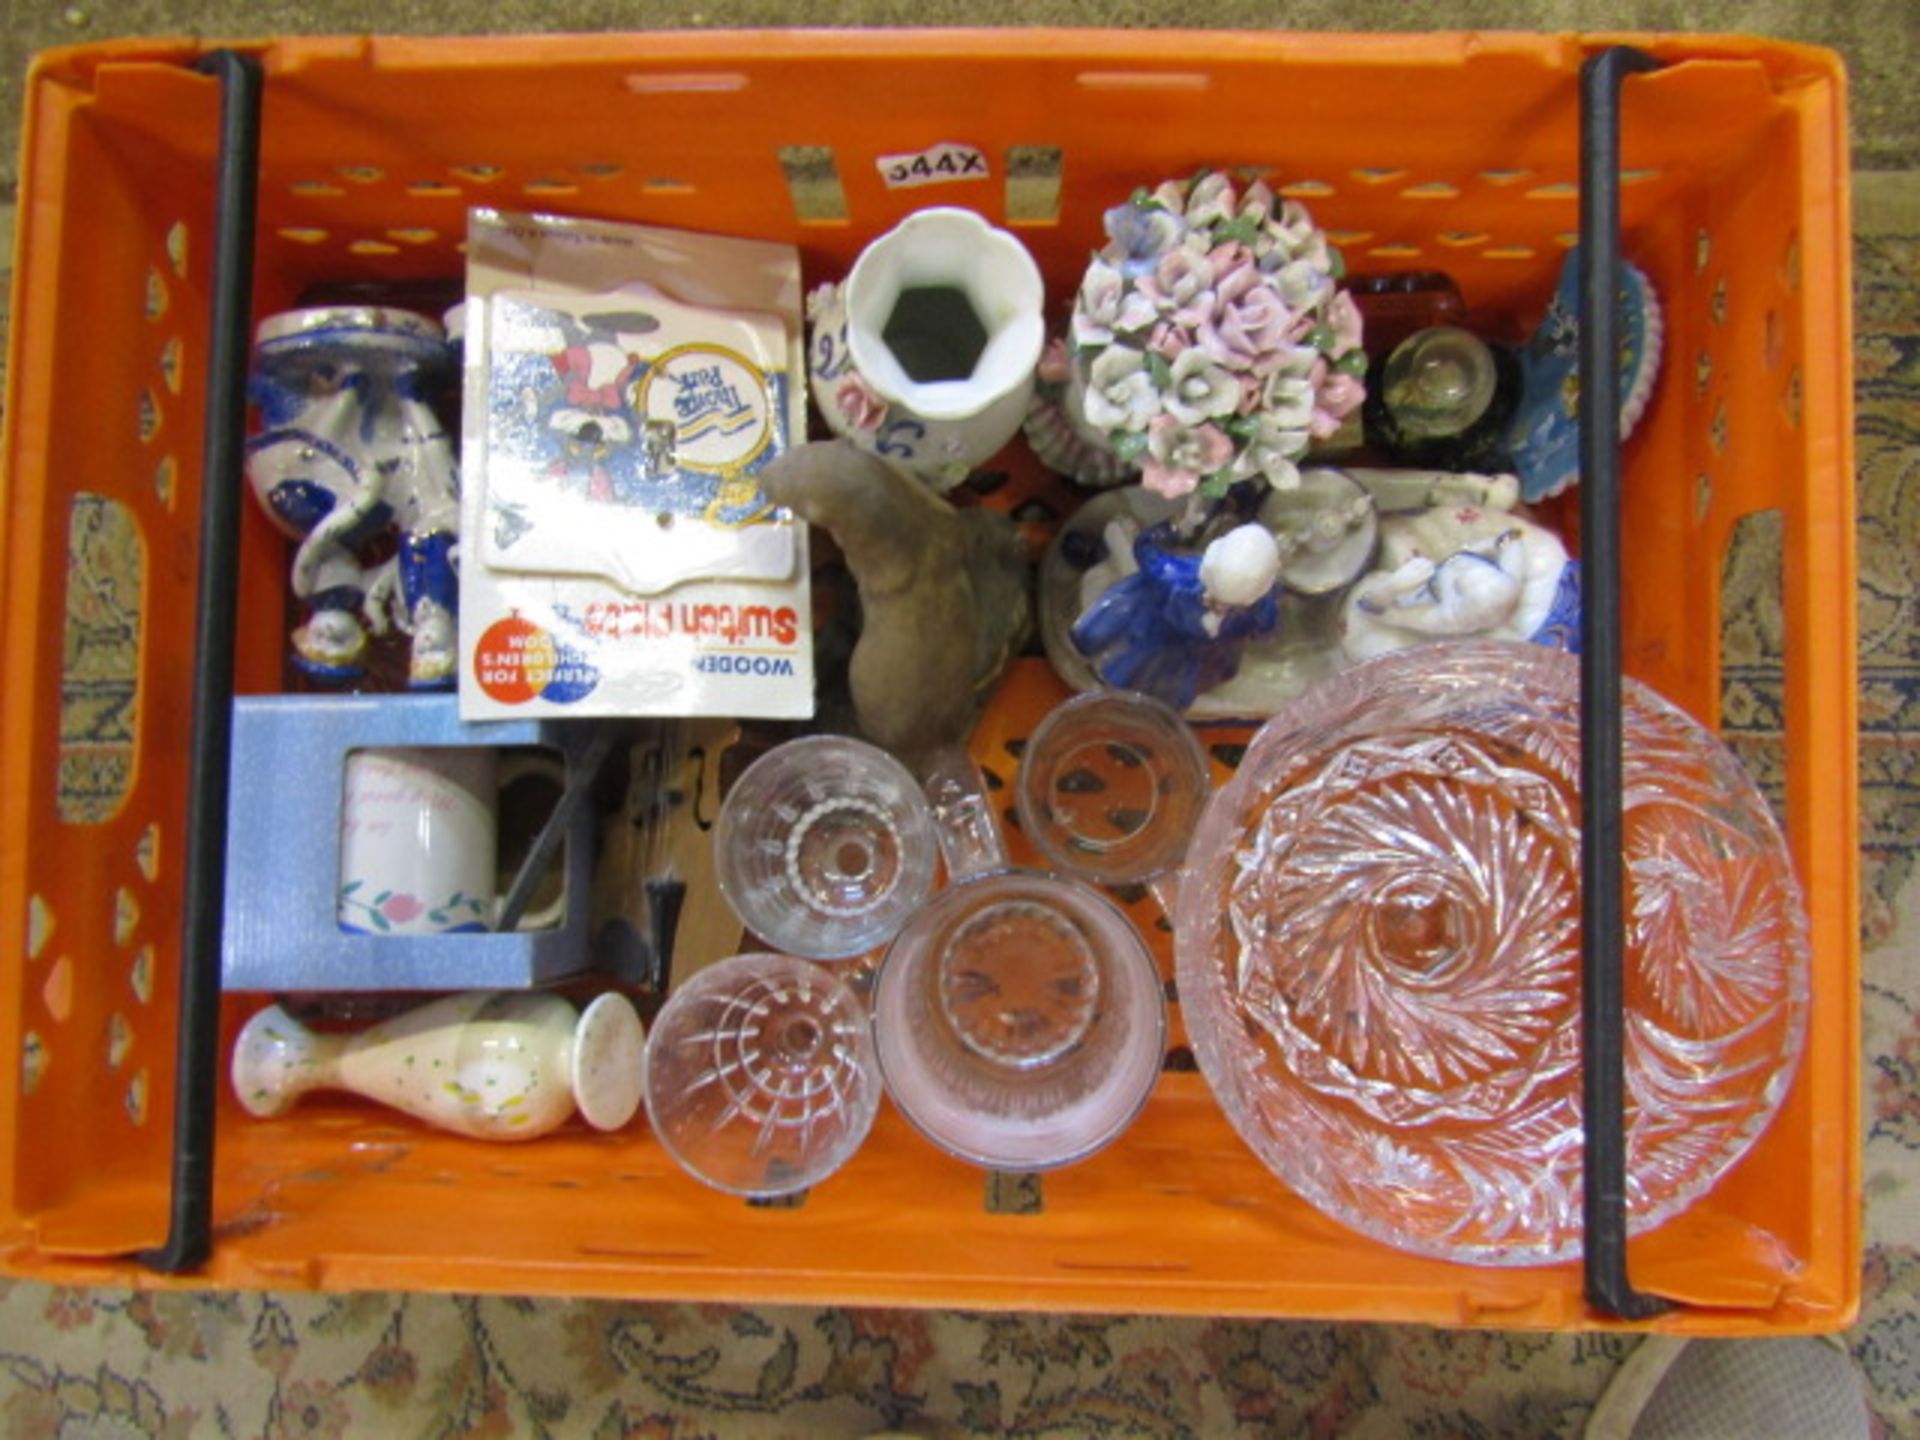 A stillage of china, glass and sundry items Stillage not included and all items must be removed - Image 10 of 15